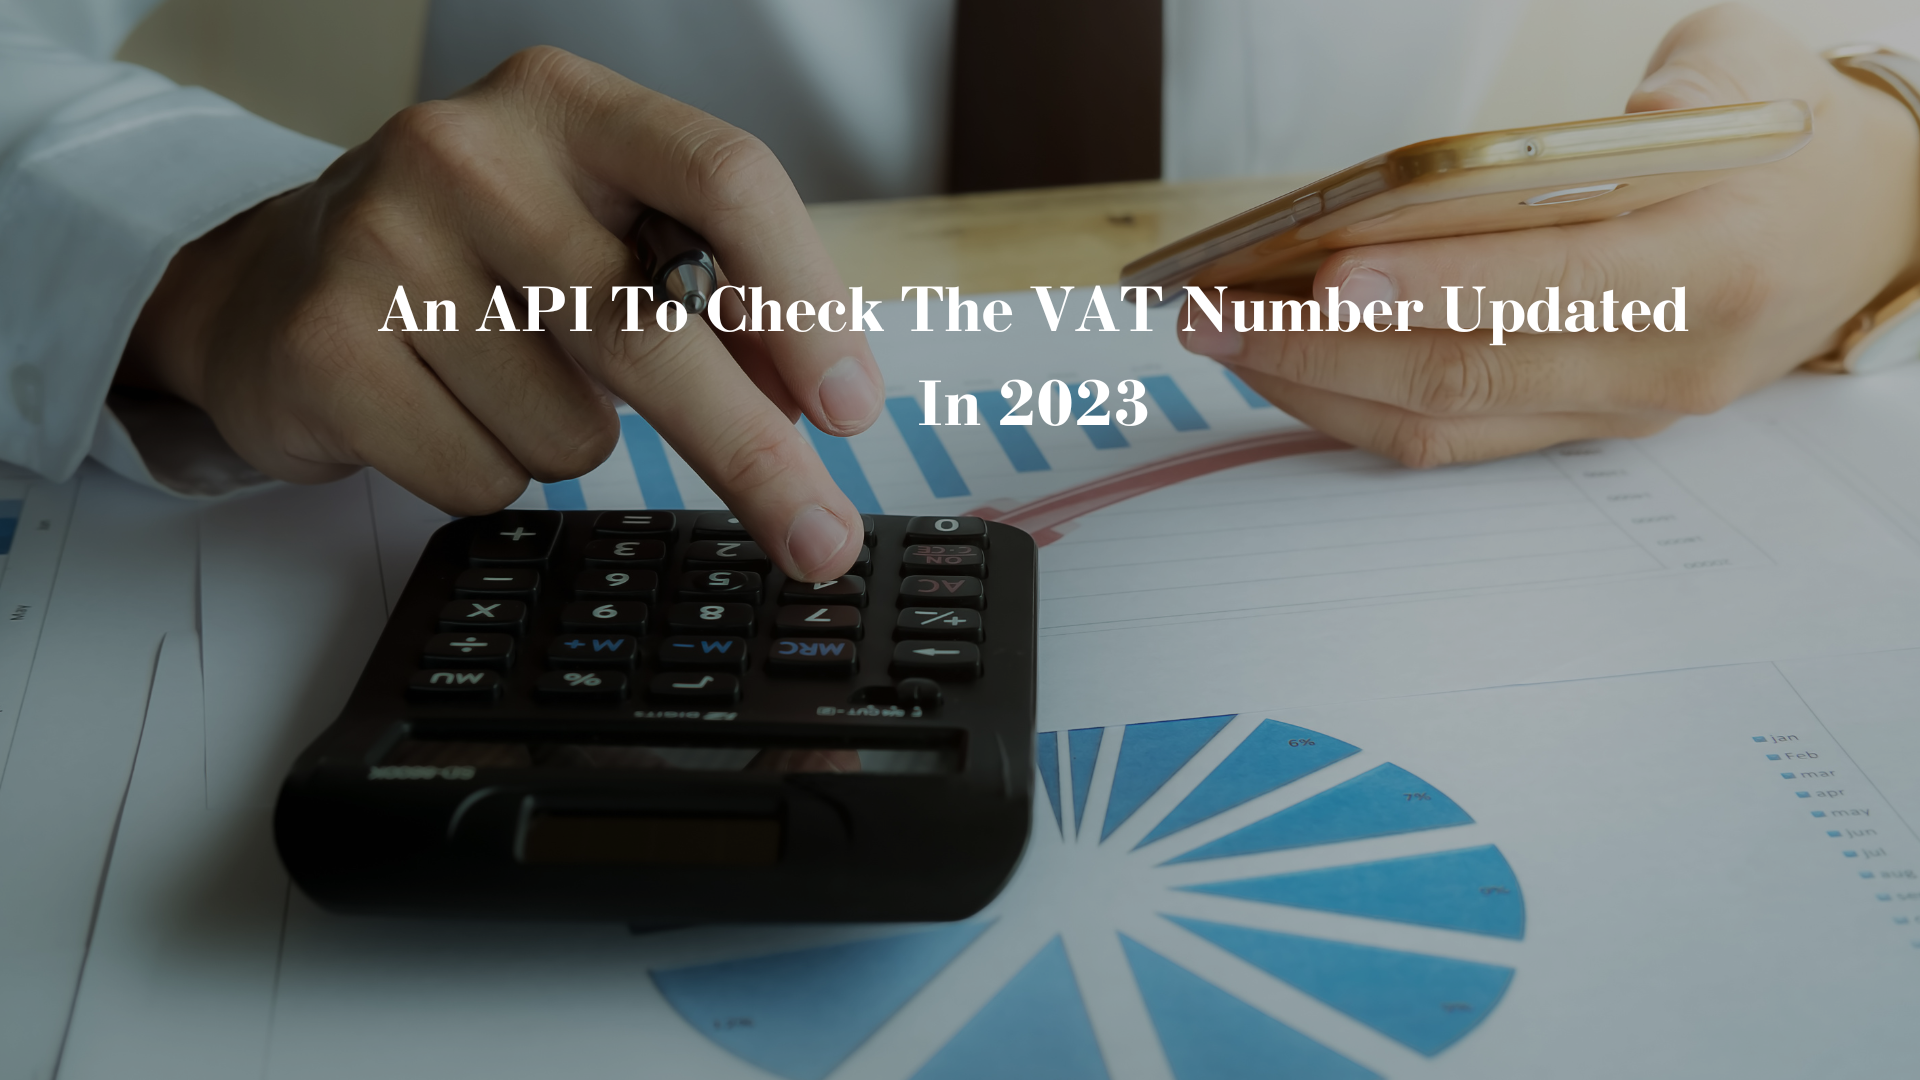 An API To Check The VAT Number Updated In 2023